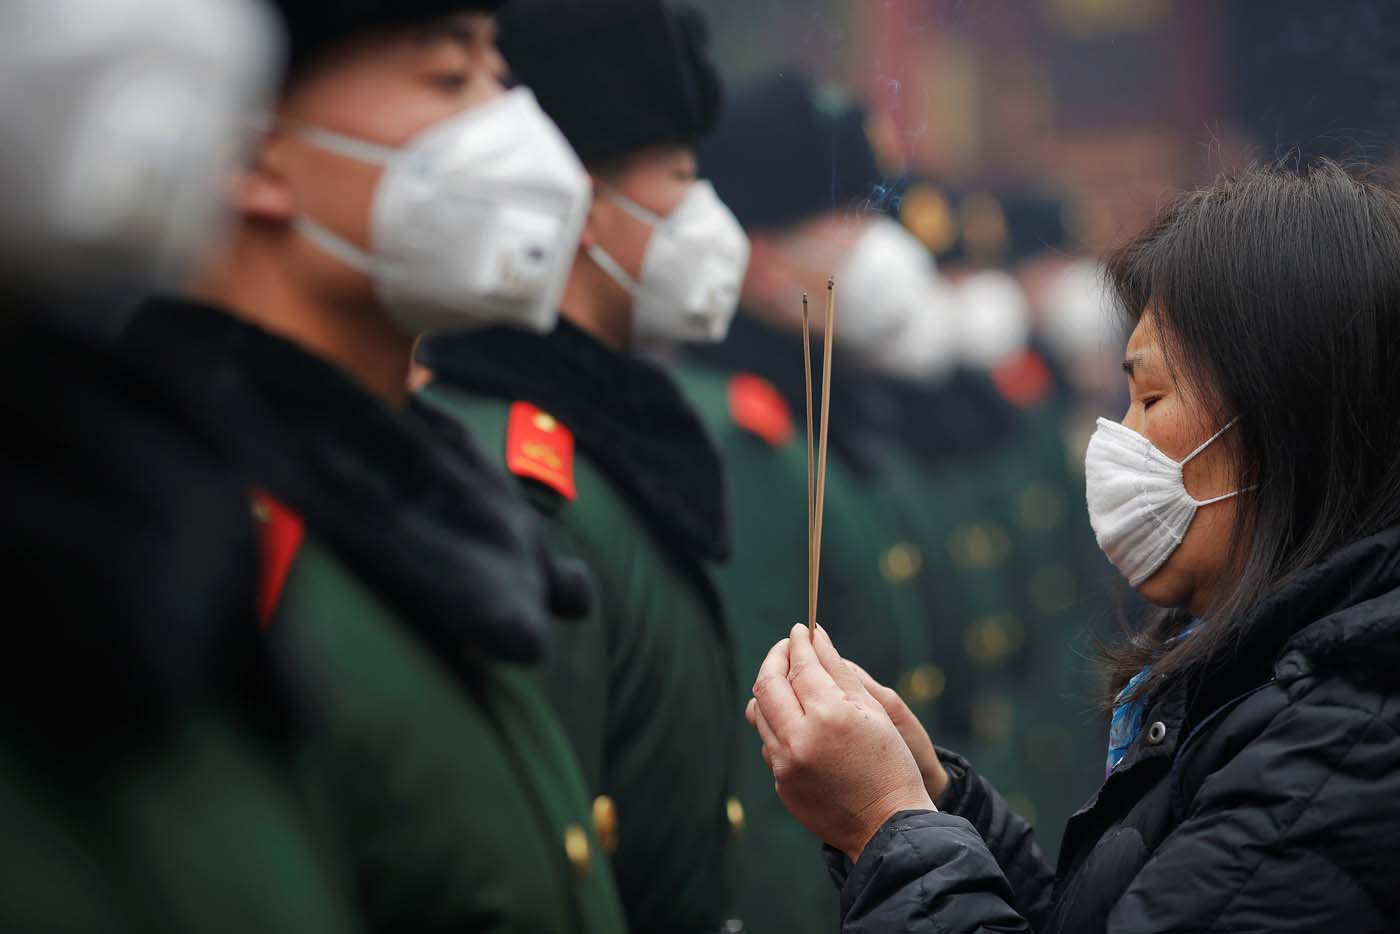 A woman holding incense sticks and paramilitary policemen wear face masks as people gather at Yonghegong Lama Temple to pray for good fortune on the first day of the Lunar New Year of the Rooster in Beijing, China January 28, 2017. REUTERS/Damir Sagolj TPX IMAGES OF THE DAY